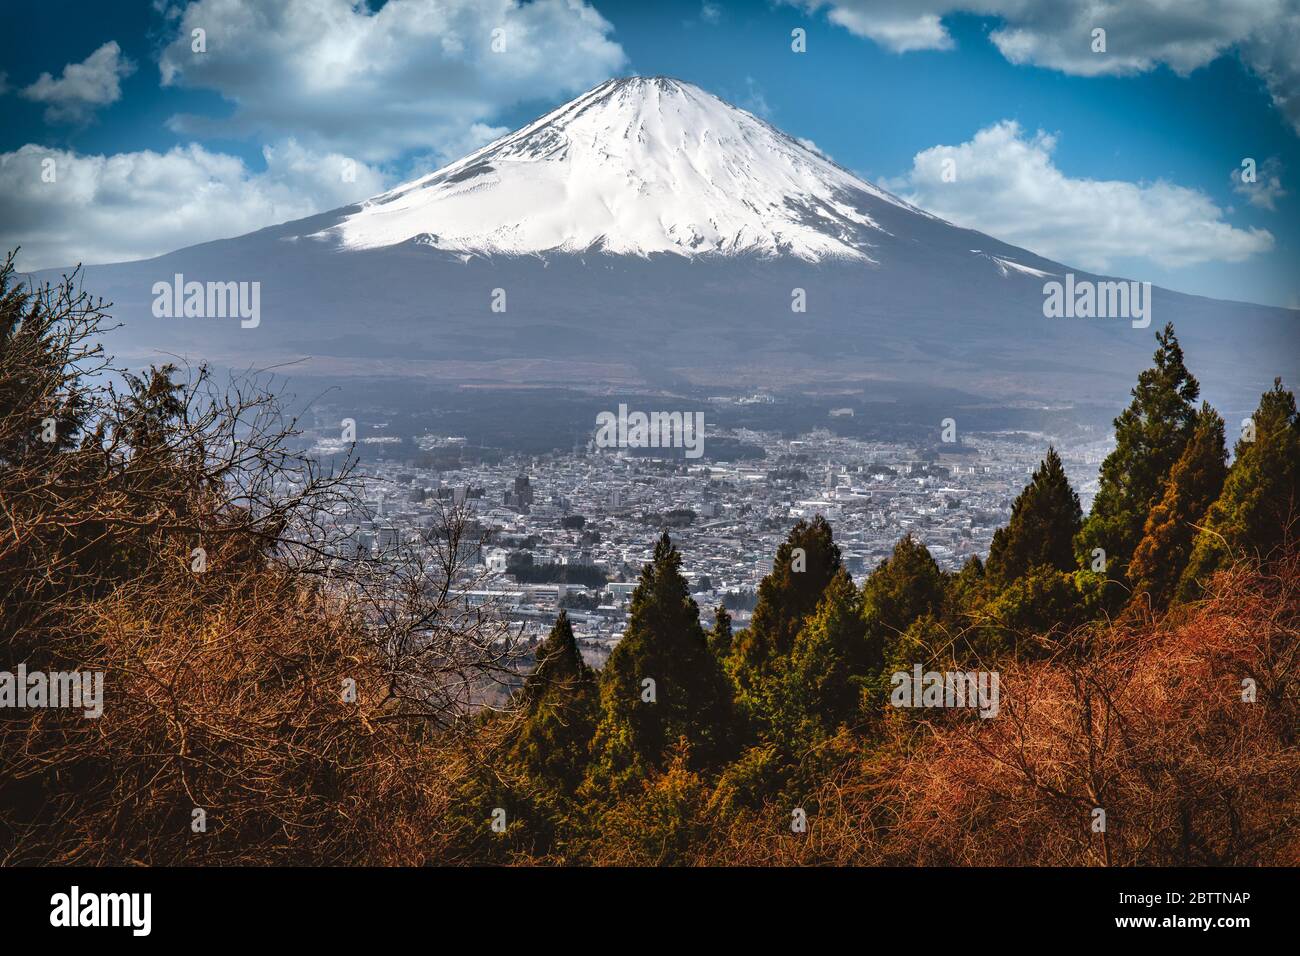 The city of Gotemba, Japan with Mount Fuji in the background. Stock Photo